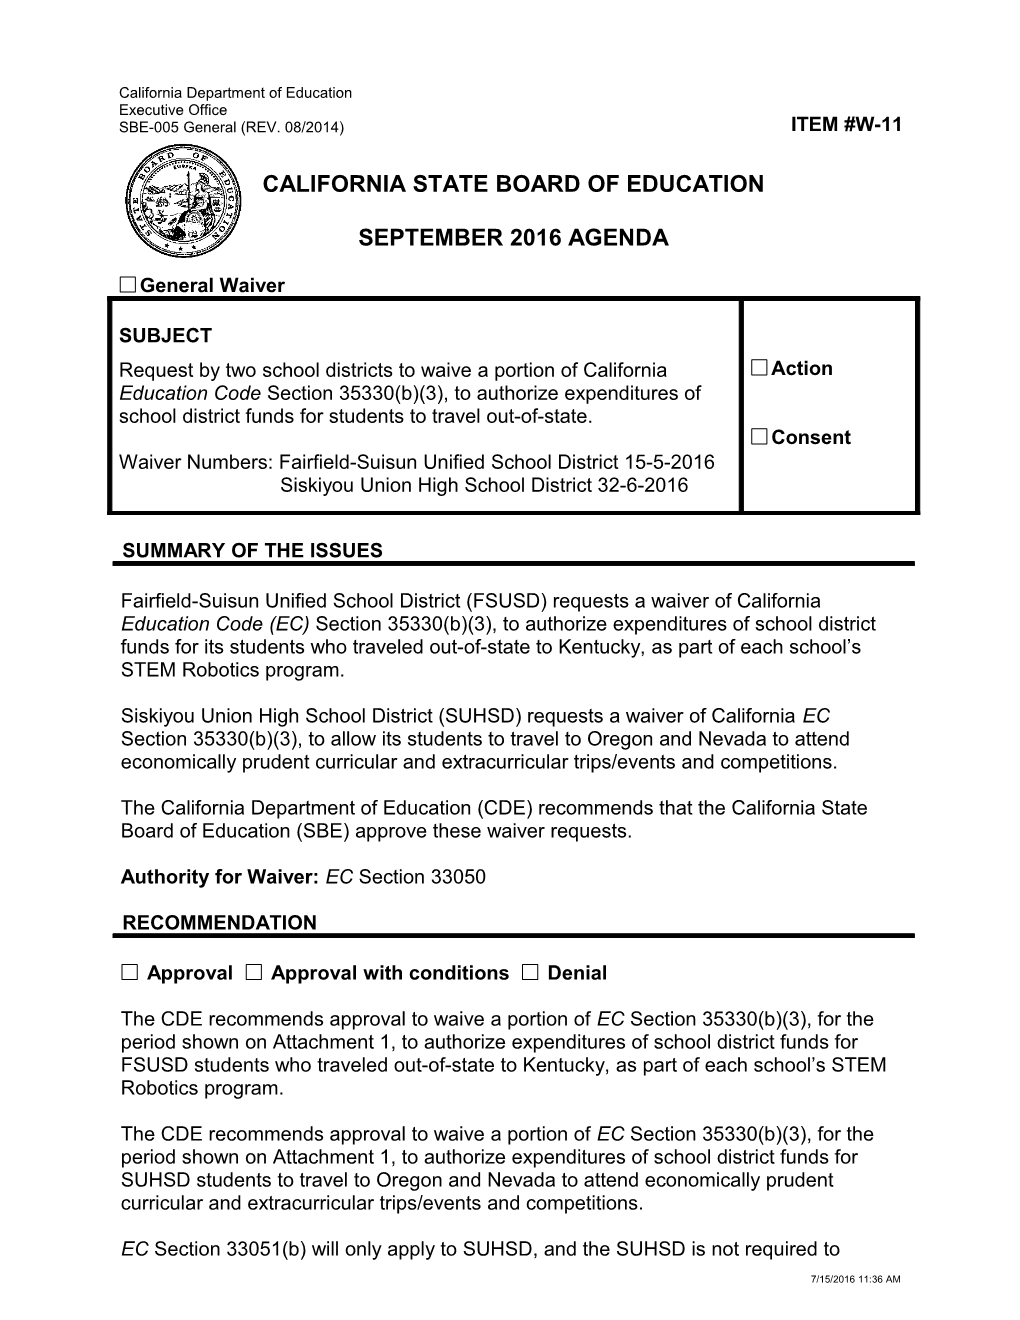 September 2016 Waiver Item W-11 - Meeting Agendas (CA State Board of Education)